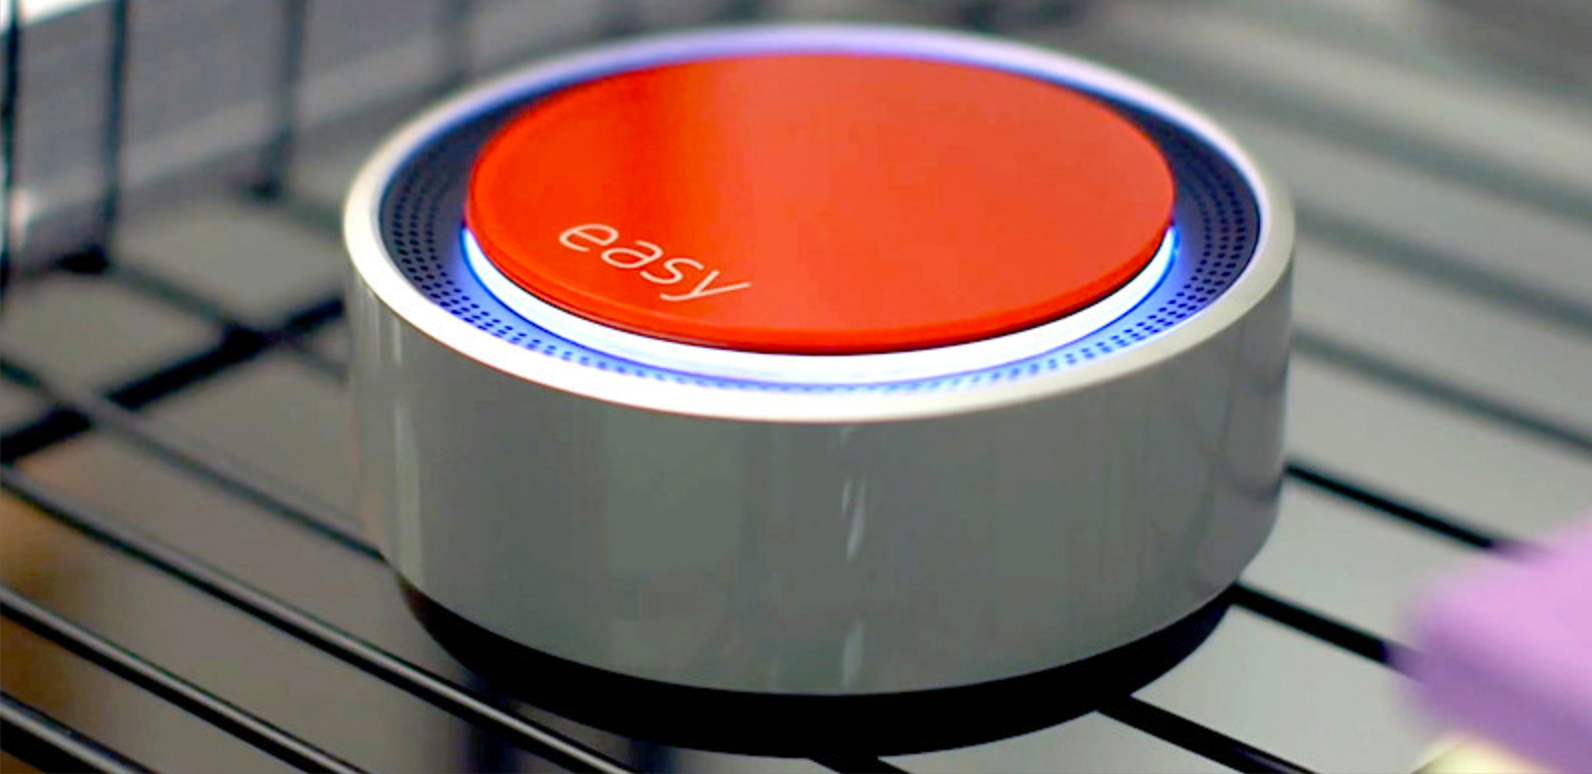 Staples 'Easy Button' brings conversational buying to the office, by Daryl  Pereira